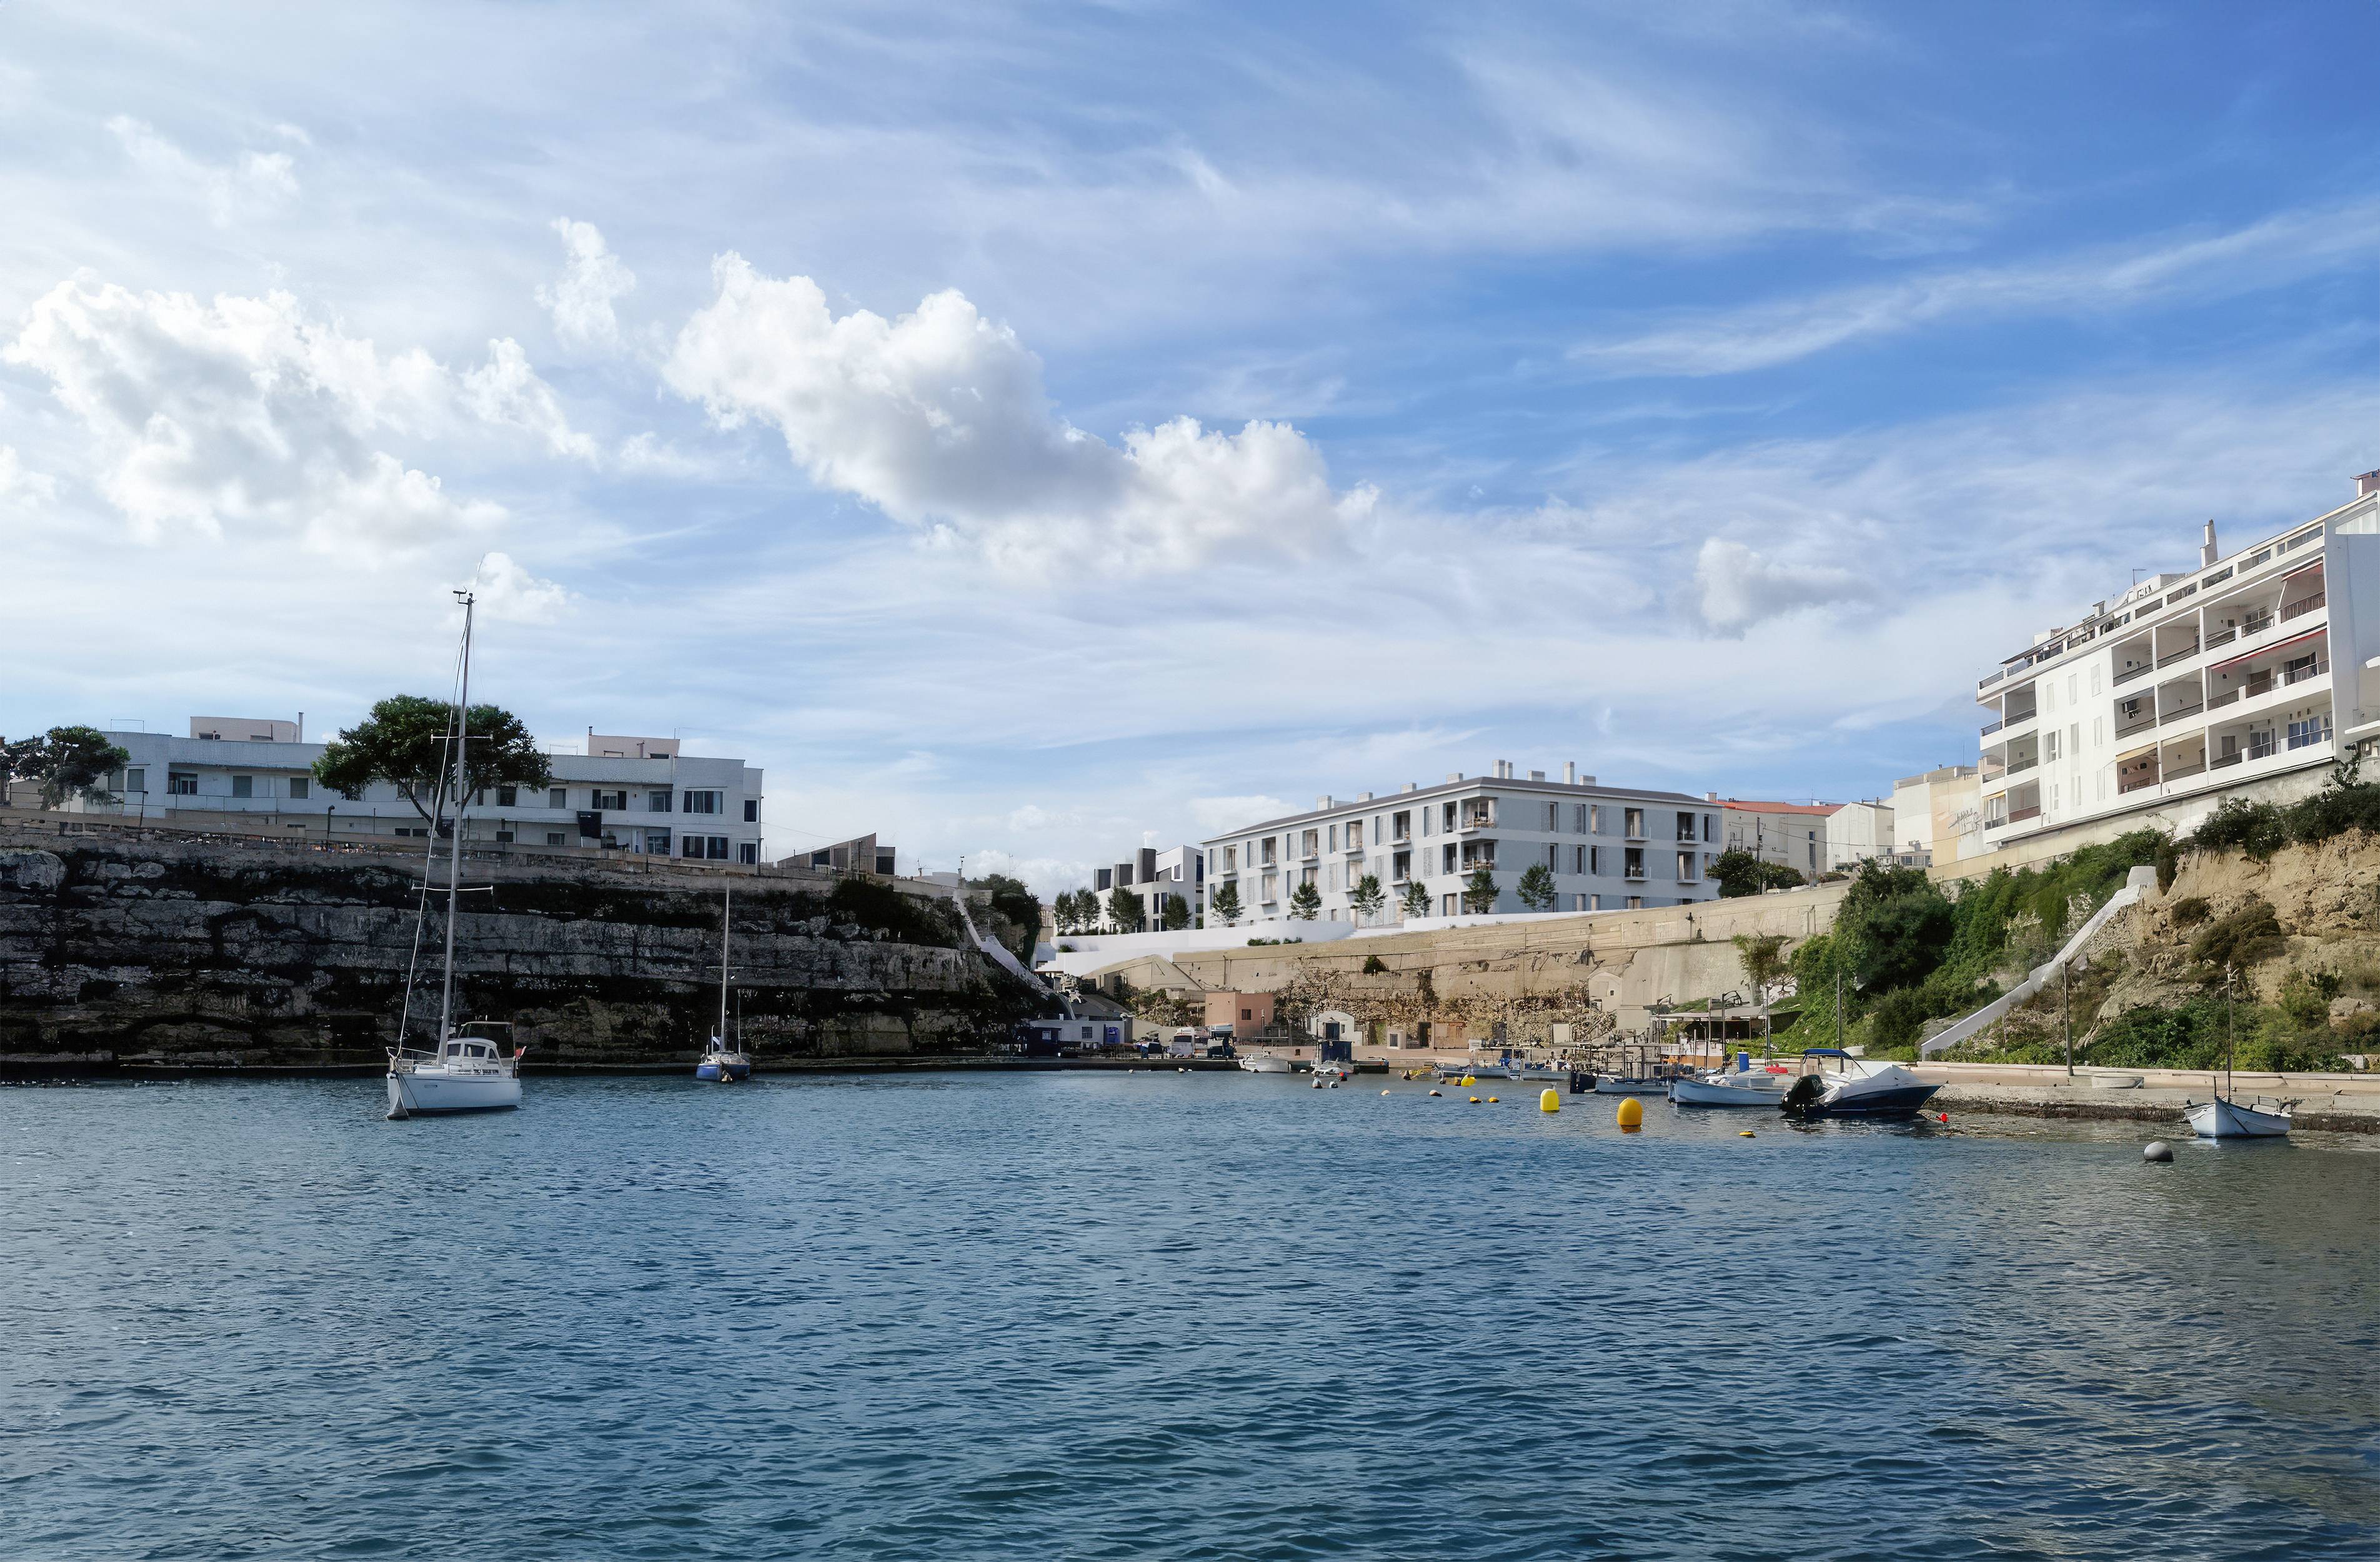 New development - Residencial Cala Corb, A new front line residential development in the harbour of Mahón, Menorca